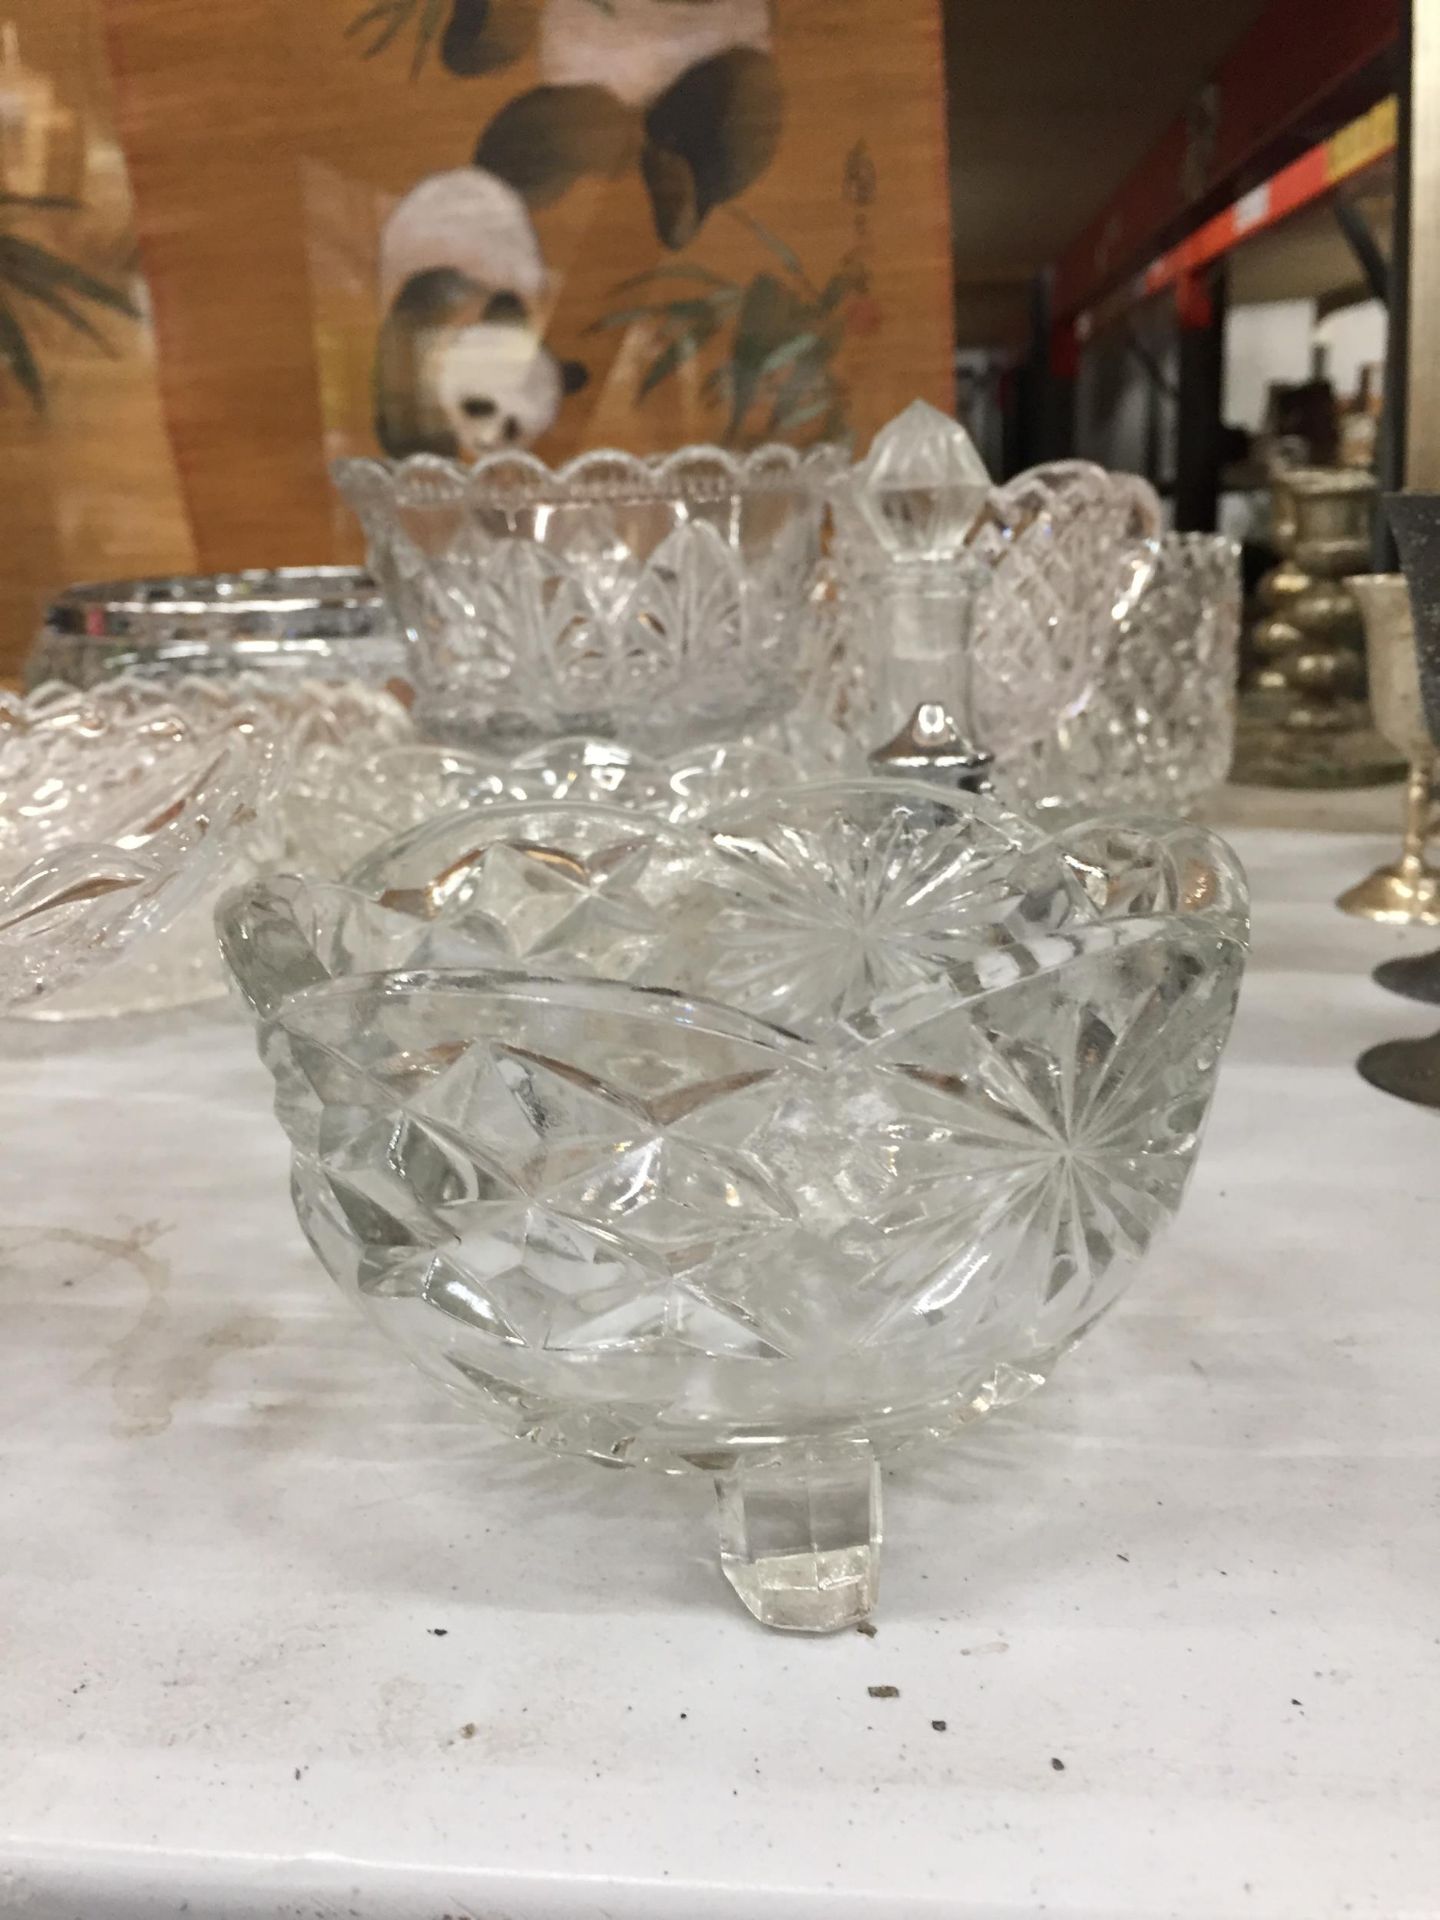 A MIXED COLLECTION OF VINTAGE CUT AND FURTHER GLASS ITEMS, BOWLS ETC - Image 2 of 3